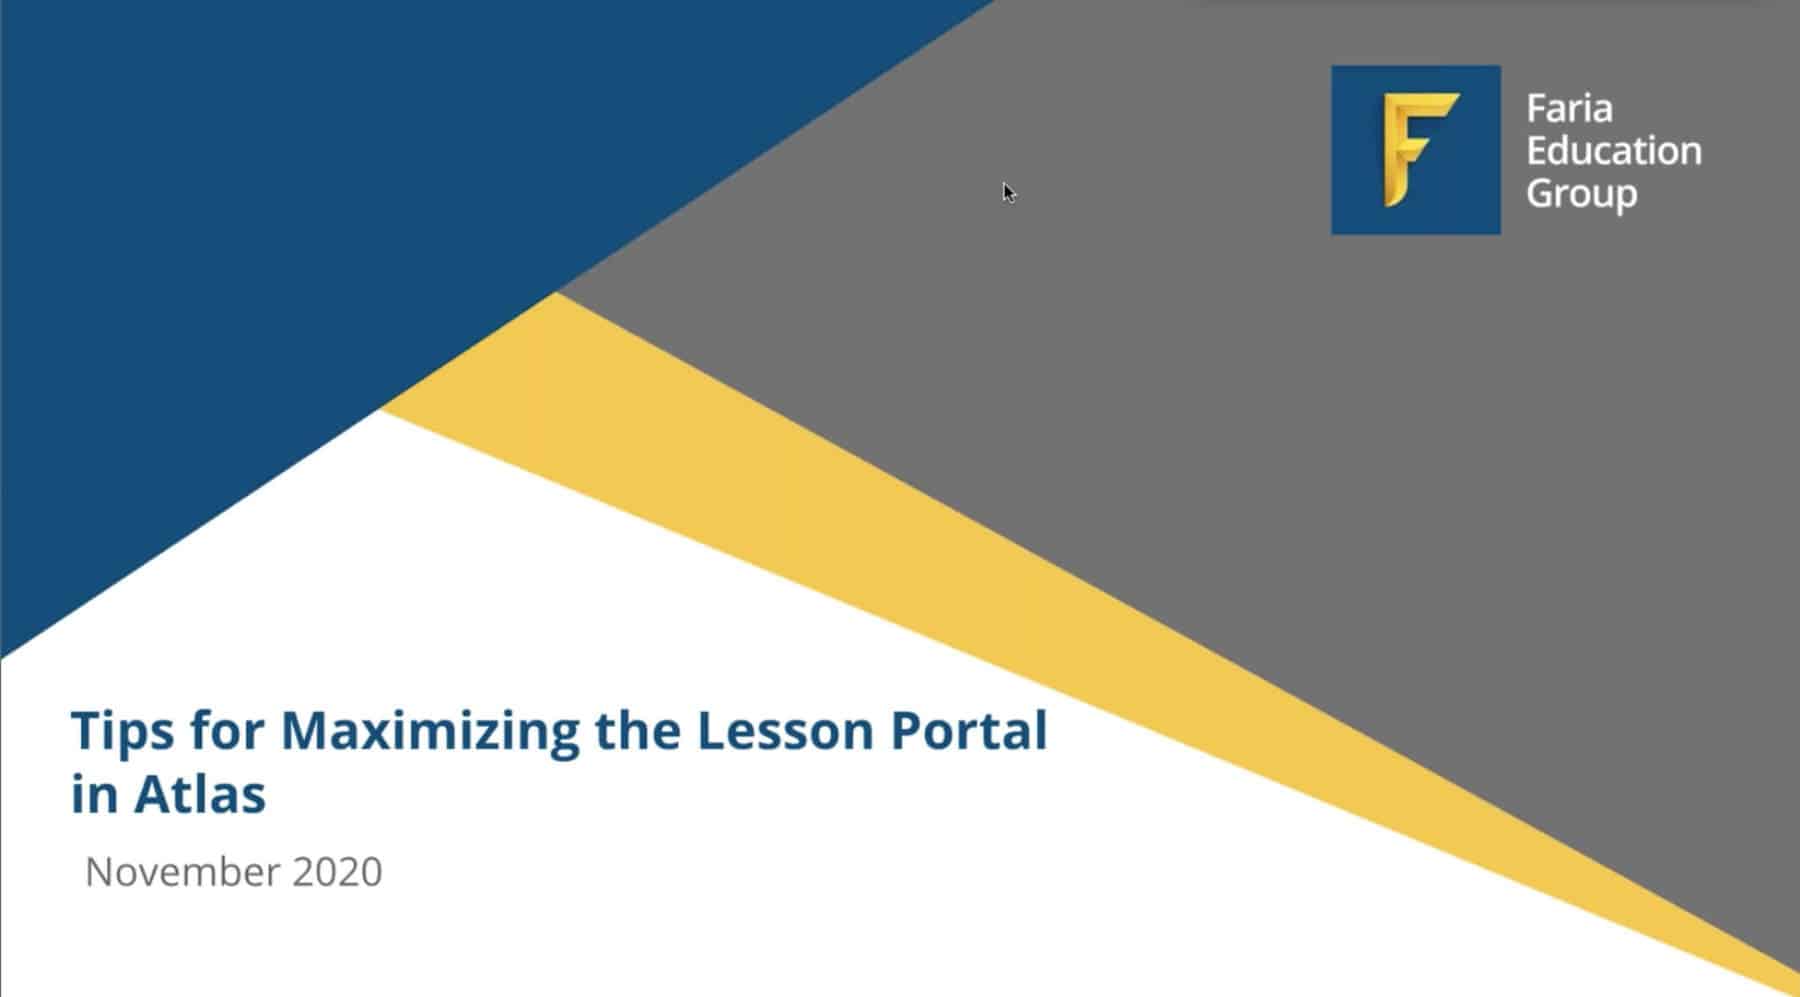 Tips for Maximizing the Lesson Portal in Atlas